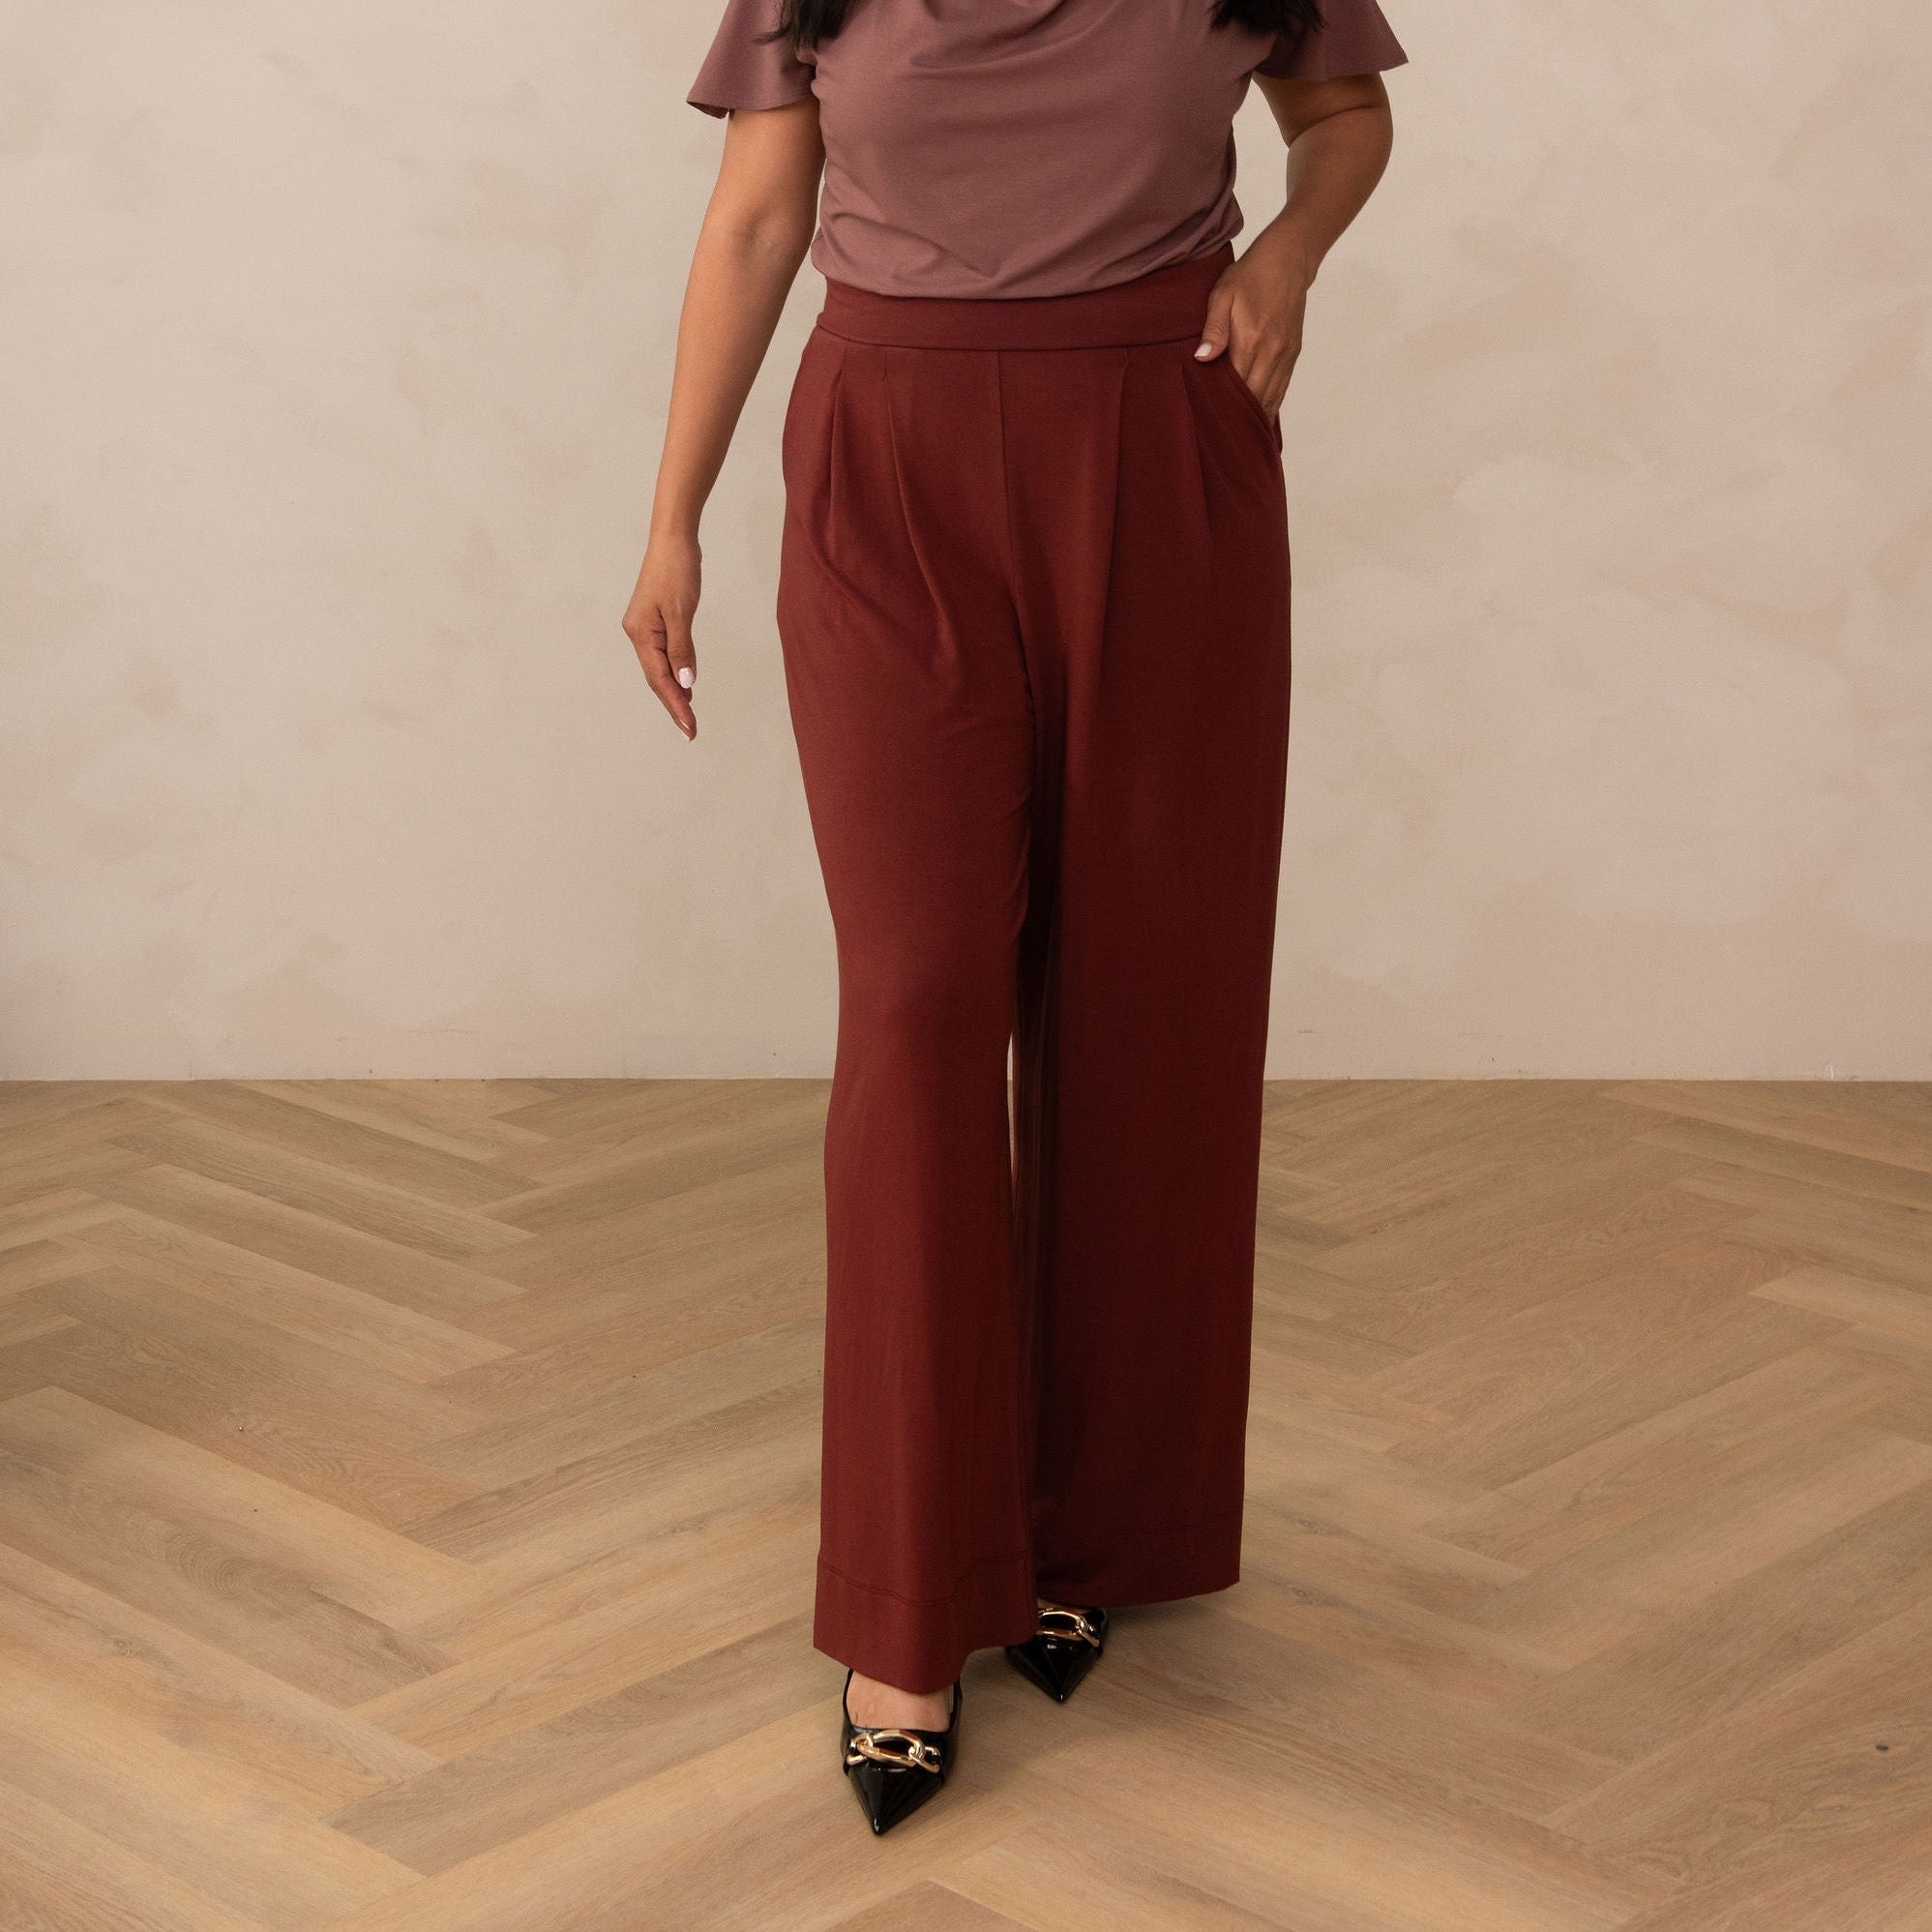 All Day Wide Leg Pant | Shop Sustainable, Ethical Clothing for Women